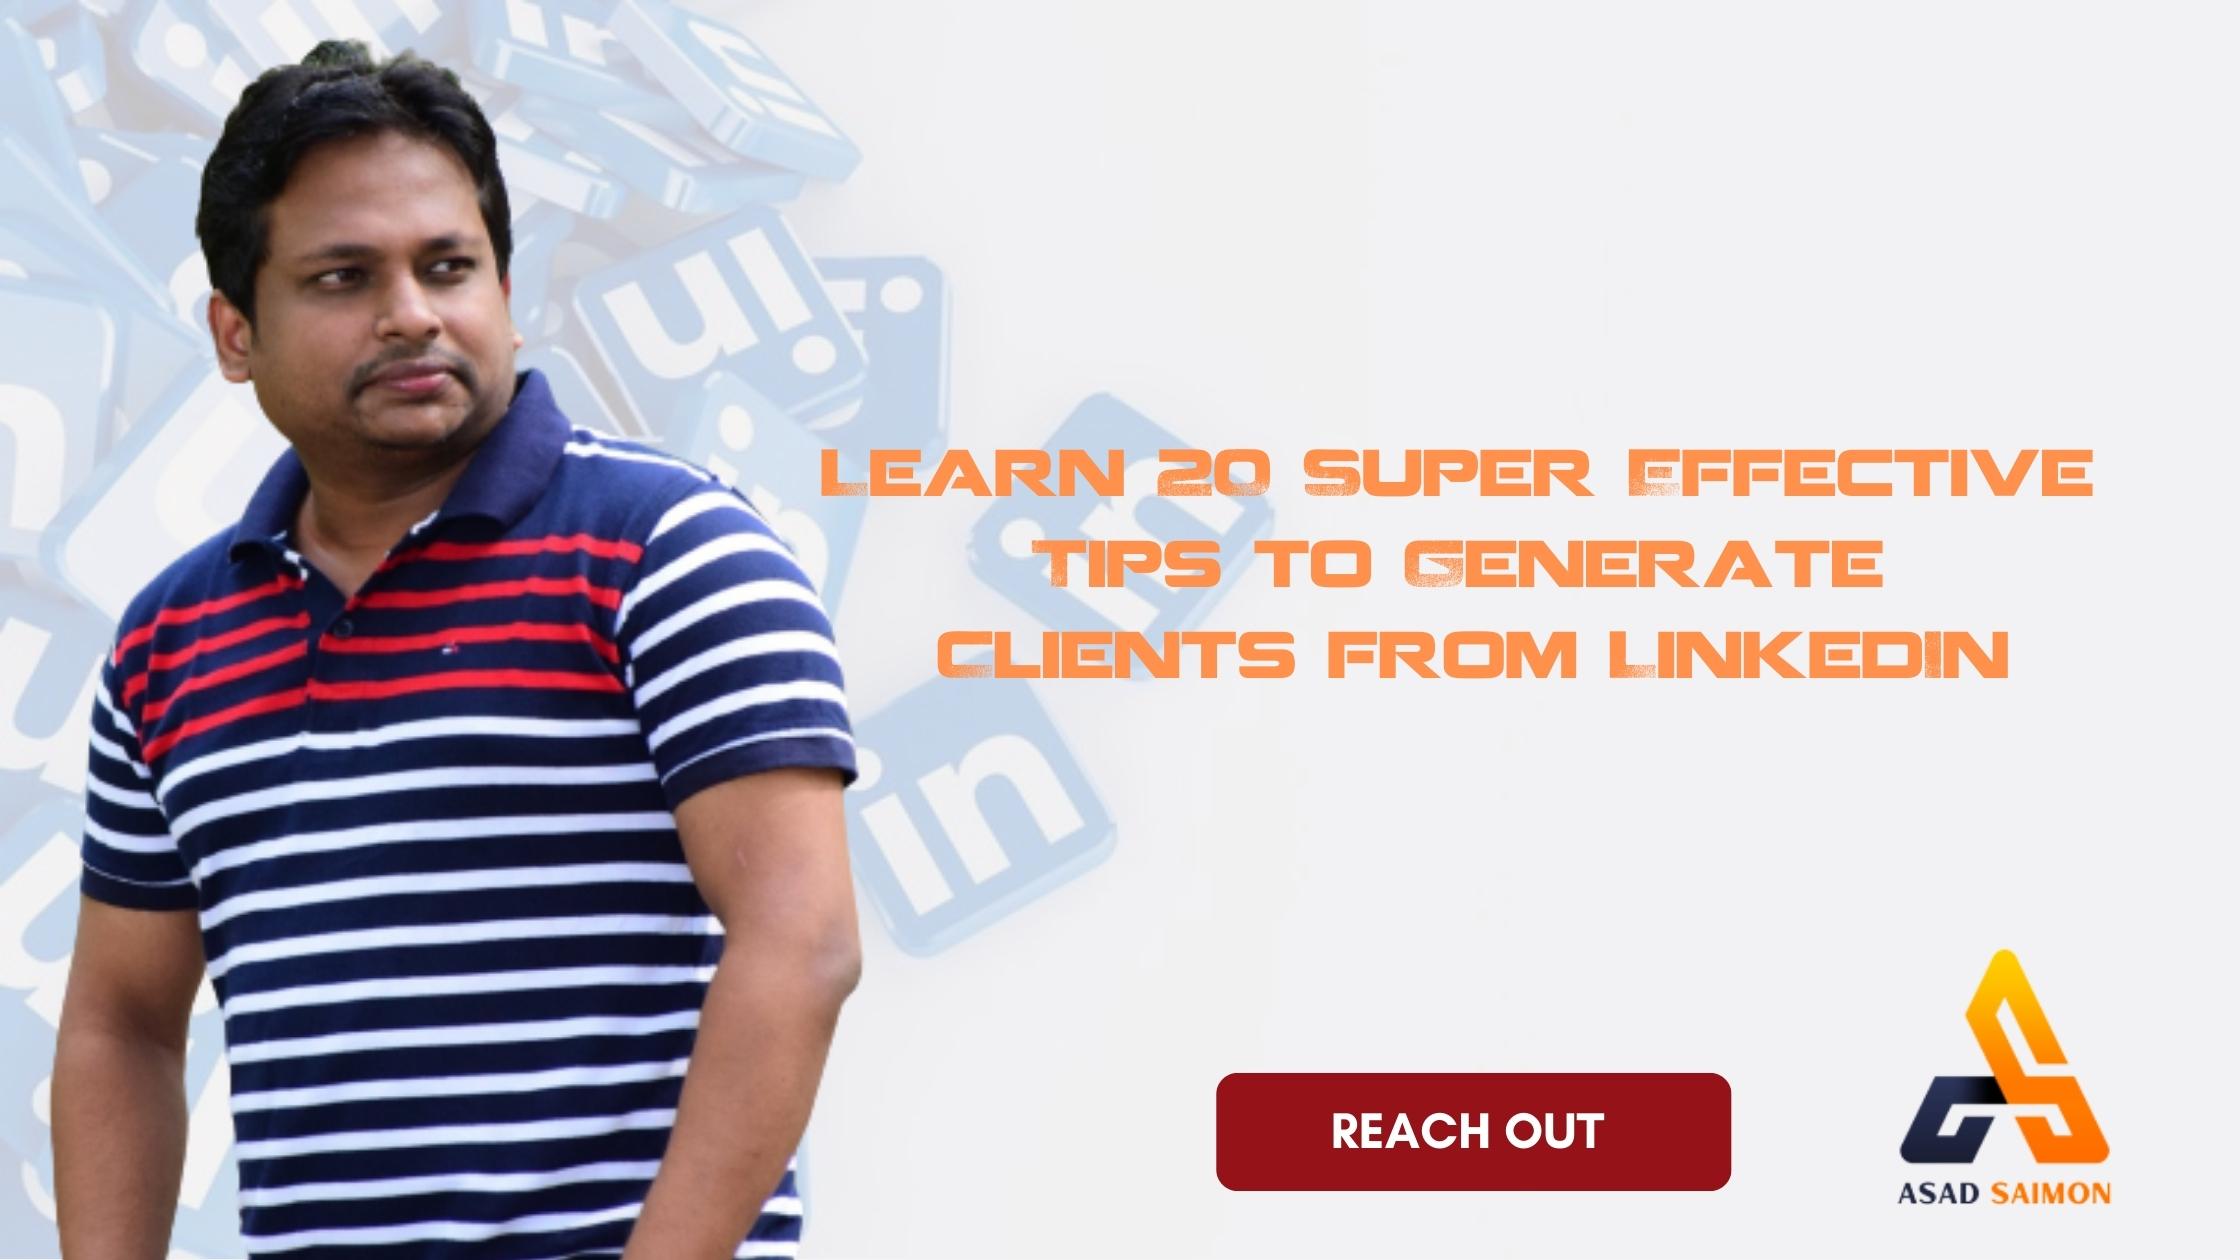 Learn 20 Super Effective Tips to Generate Clients from LinkedIn